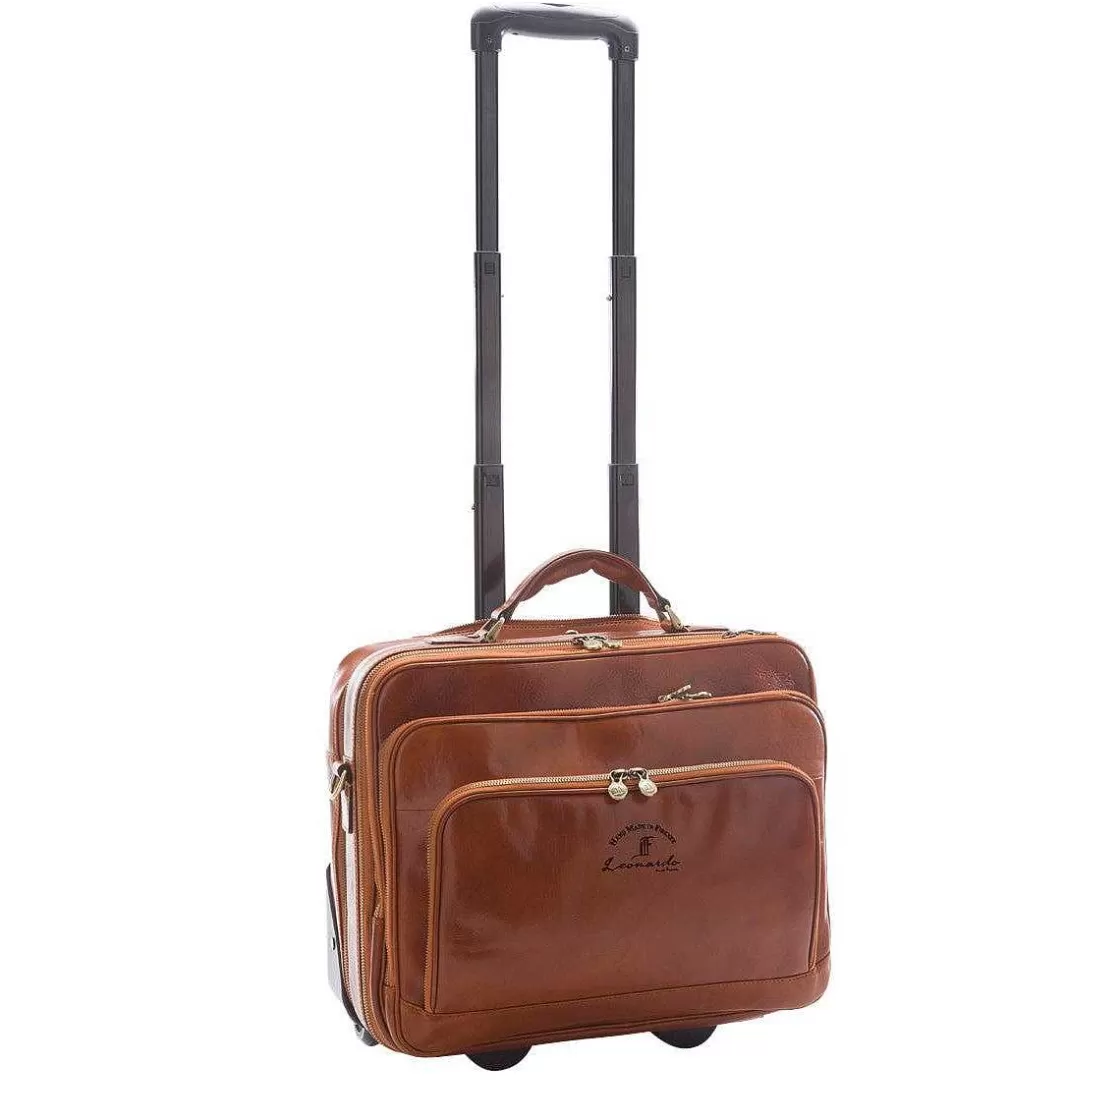 Leonardo Small Travel Trolley Pilot Bag In Full Grain Leather With Zip Closure In Various Colors Clearance